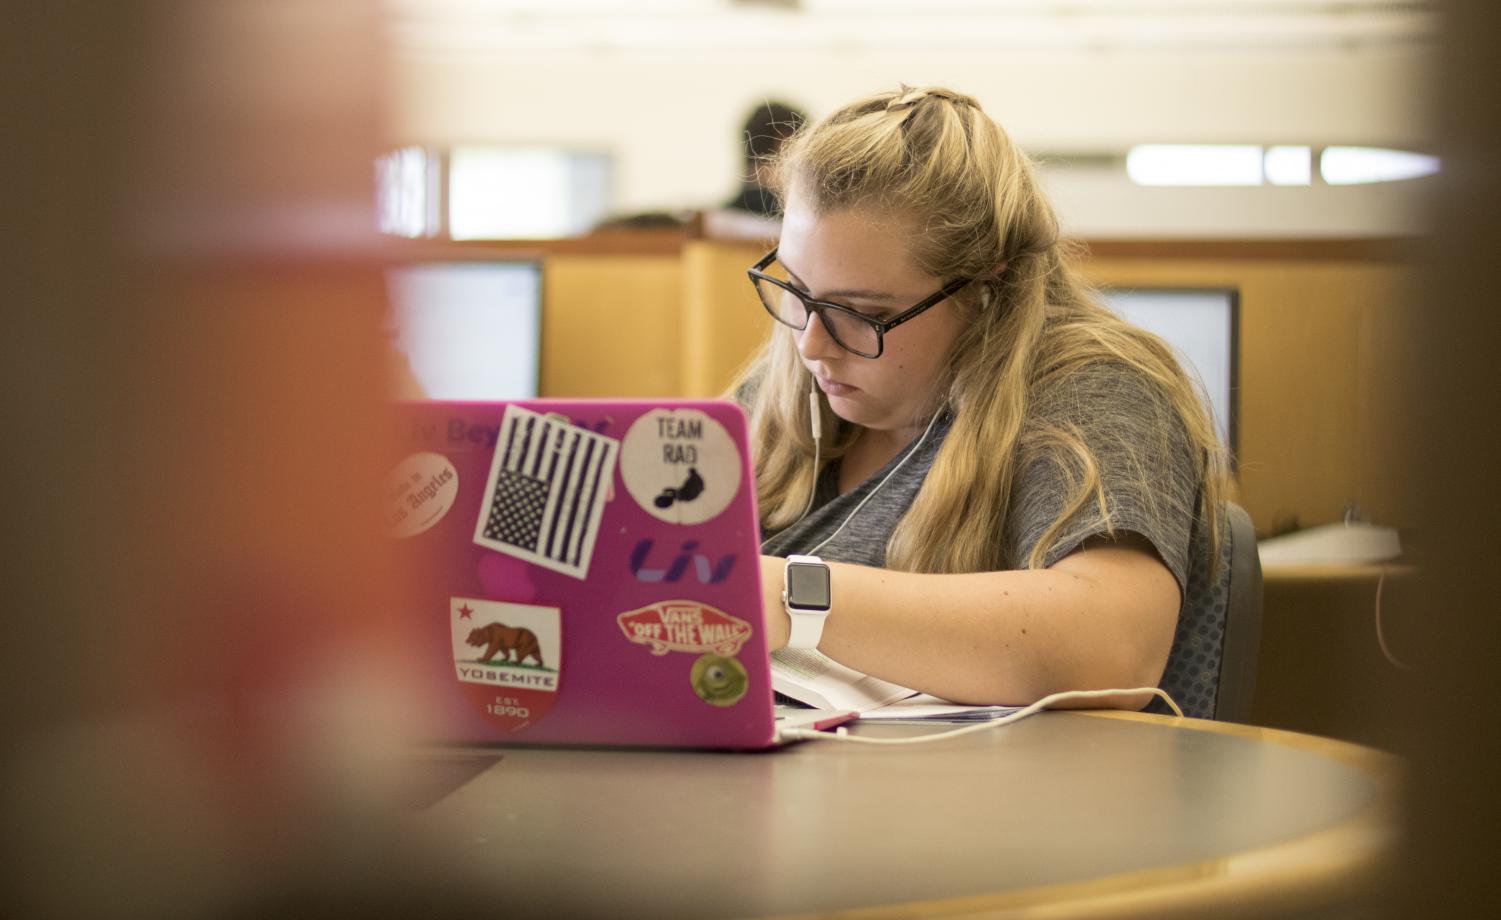 Emmerson Kelly, Moorpark student, uses her laptop to study for her english class in the top floor of the library on Wednesday, Oct. 16, 2019. Although making the switch to online classes may be tough for some students, Kelly says that taking online classes has allowed her to do classwork when it is most convenient.